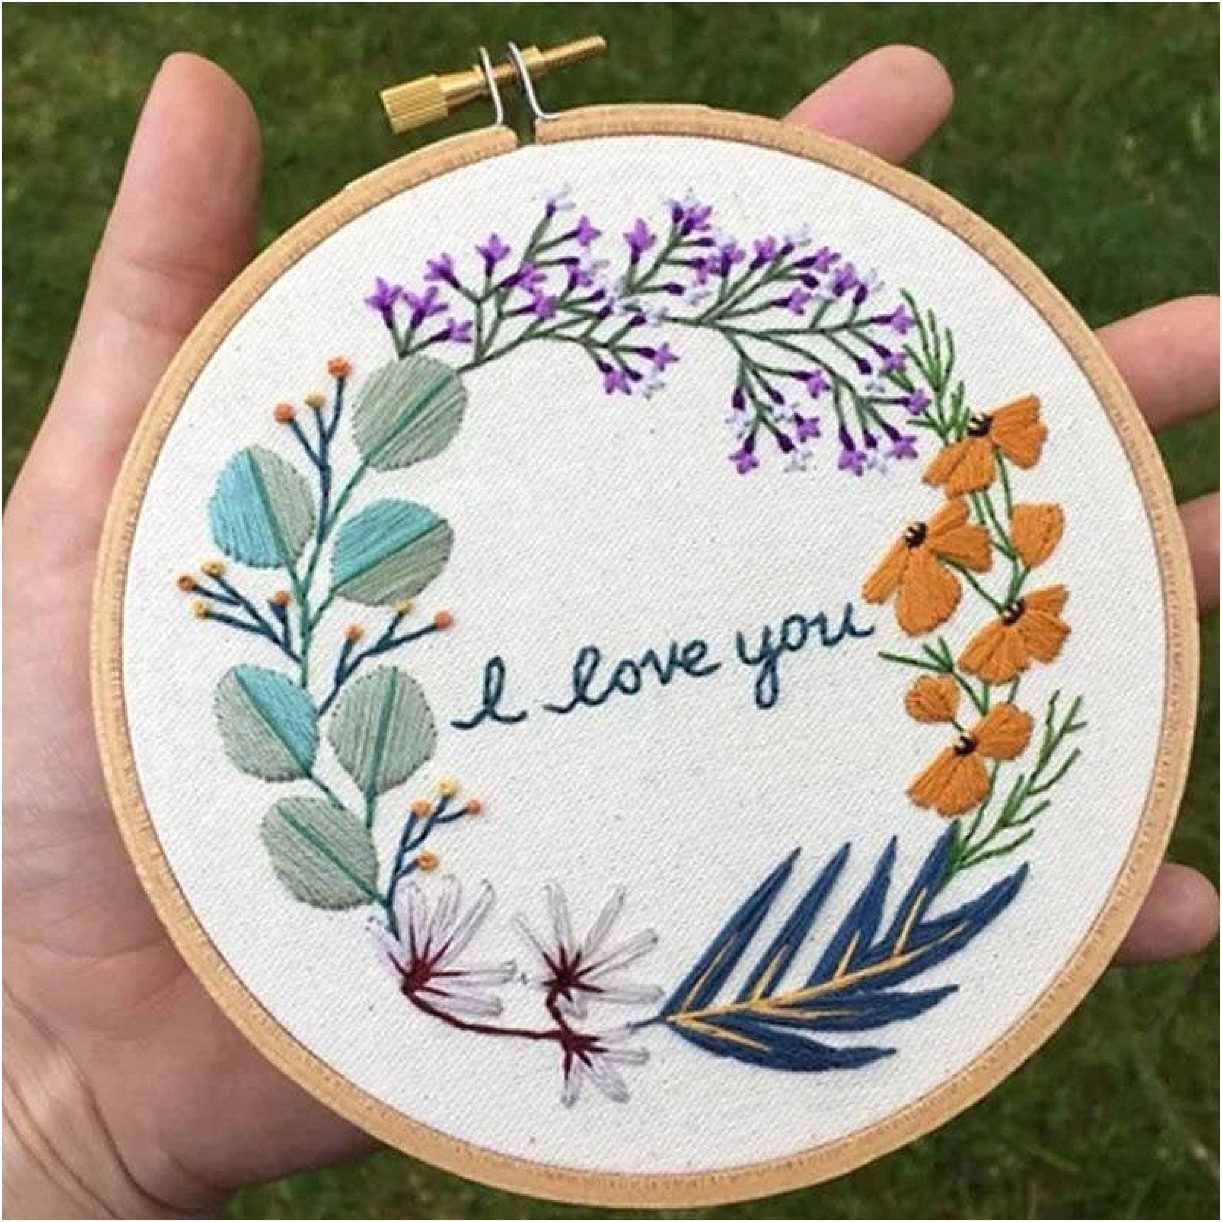 12 DIY Embroidery Designs for Your New Home | Hill City Bride Virginia Weddings I Love You